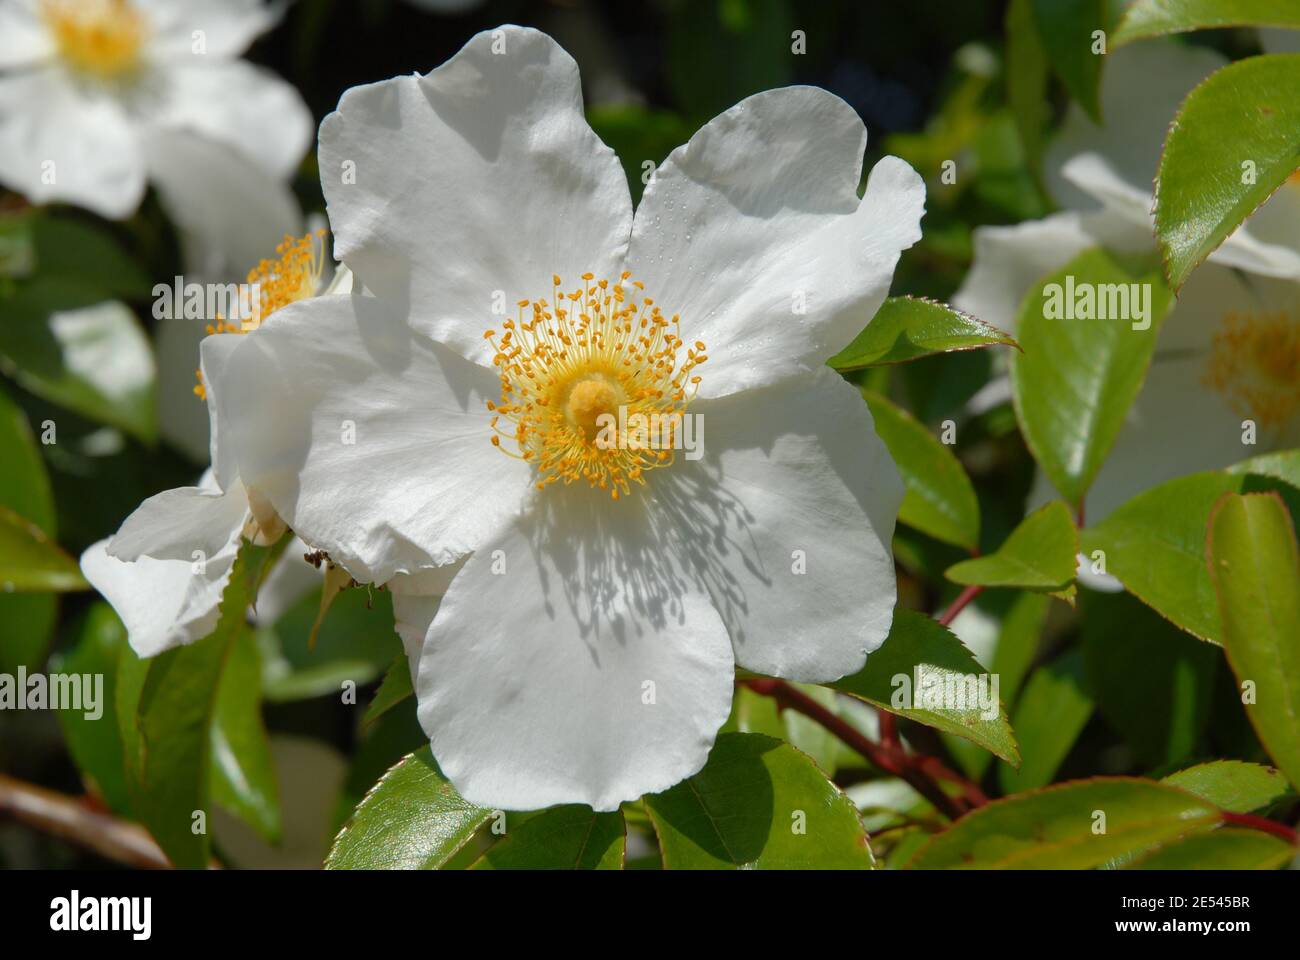 Rambling rose, known as Coopers Burmese or Rosa gigantea Cooperi, a beautiful white rose with yellow stamens, Stock Photo